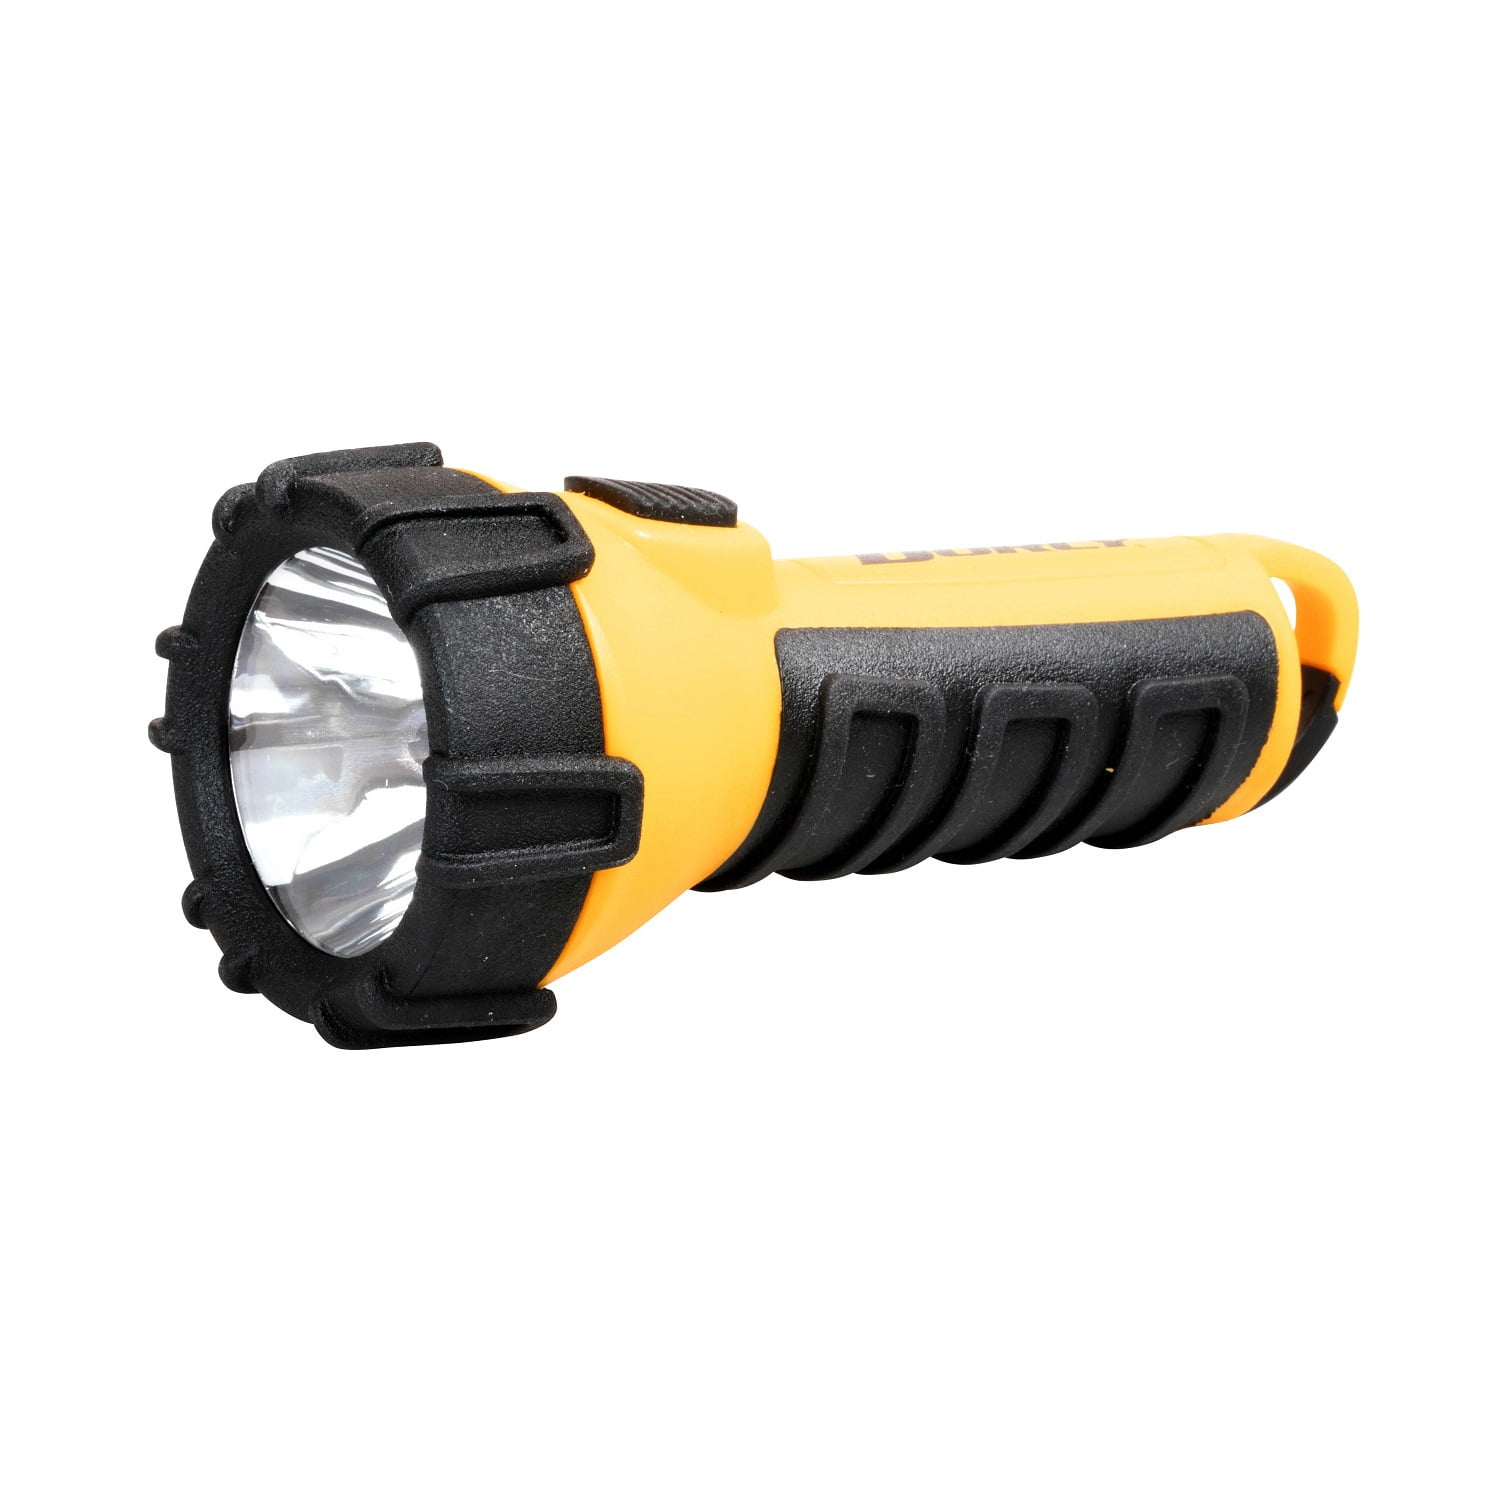 Dorcy 3AAA LED Floating Flashlight with Carabiner Yellow 41-2522